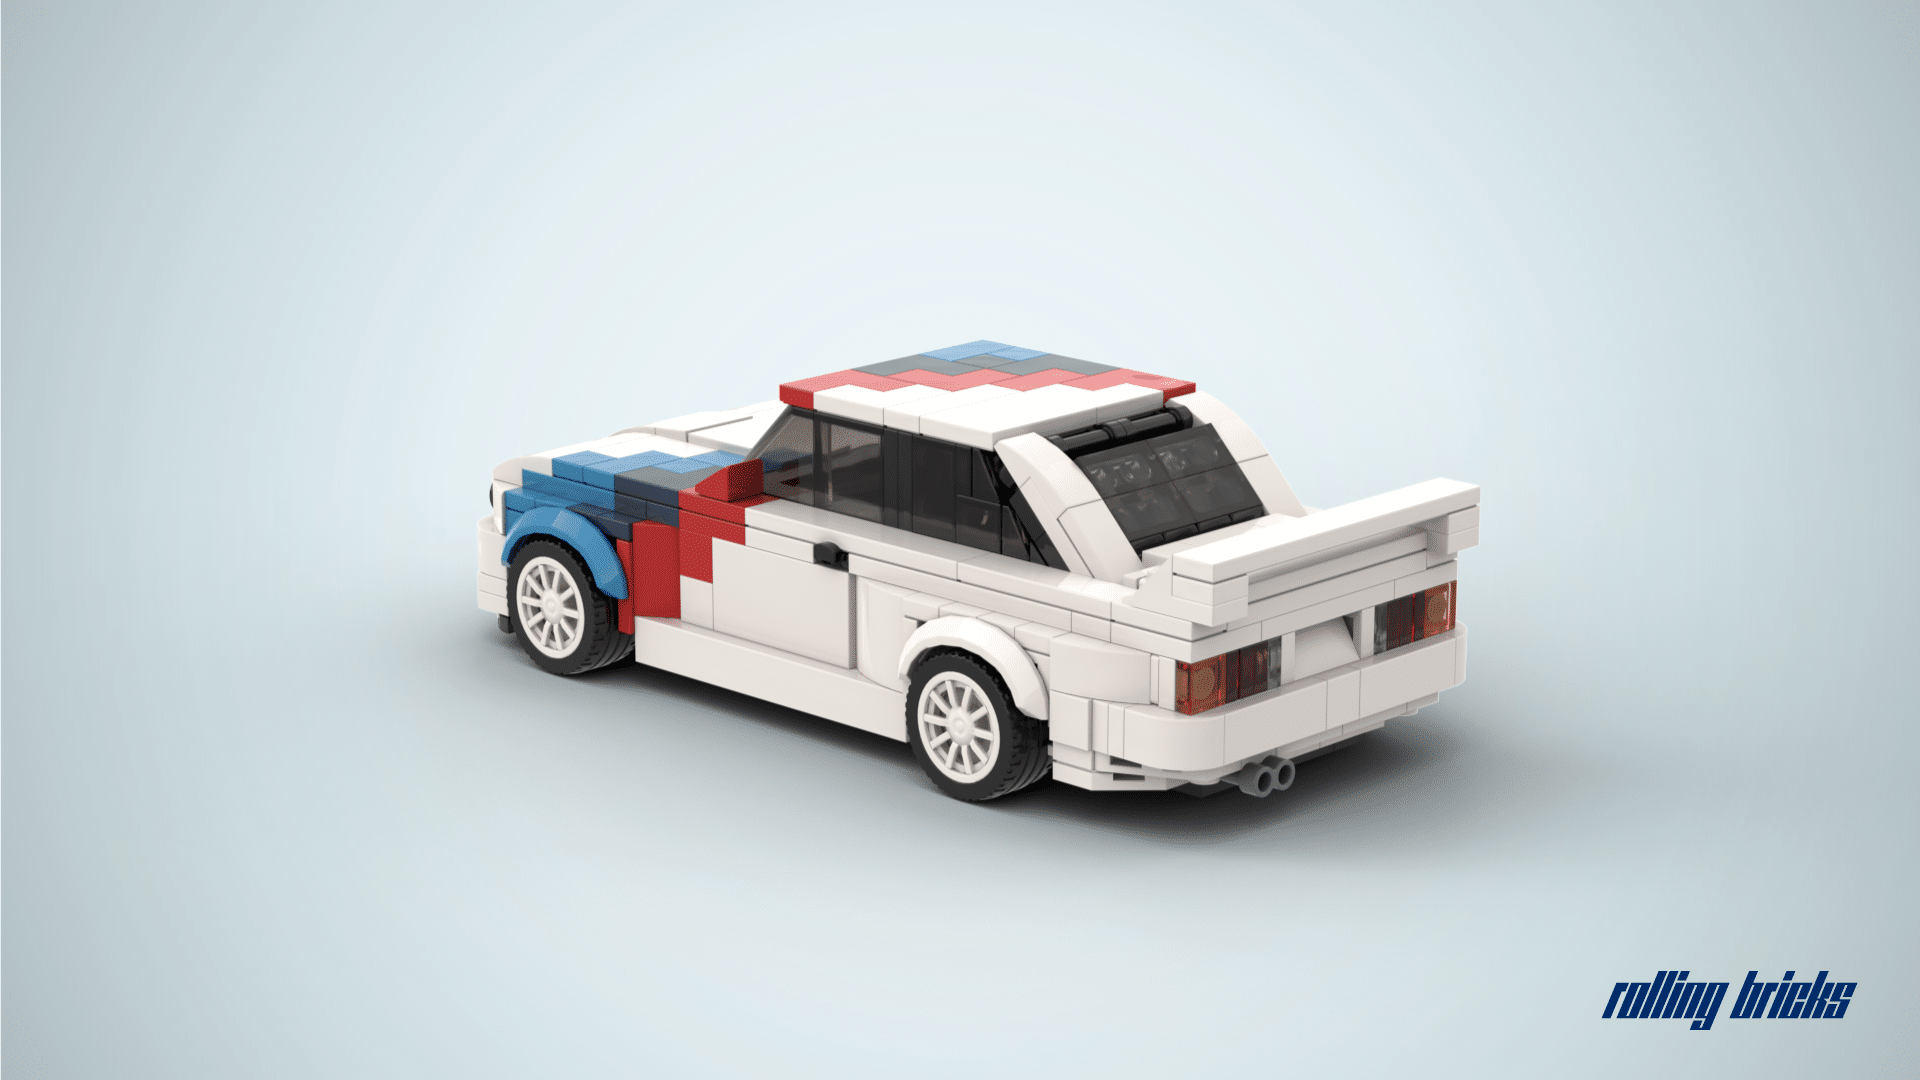 LEGO MOC 10304 BMW M3 E30 (2in1 coupe and convertible versions) by